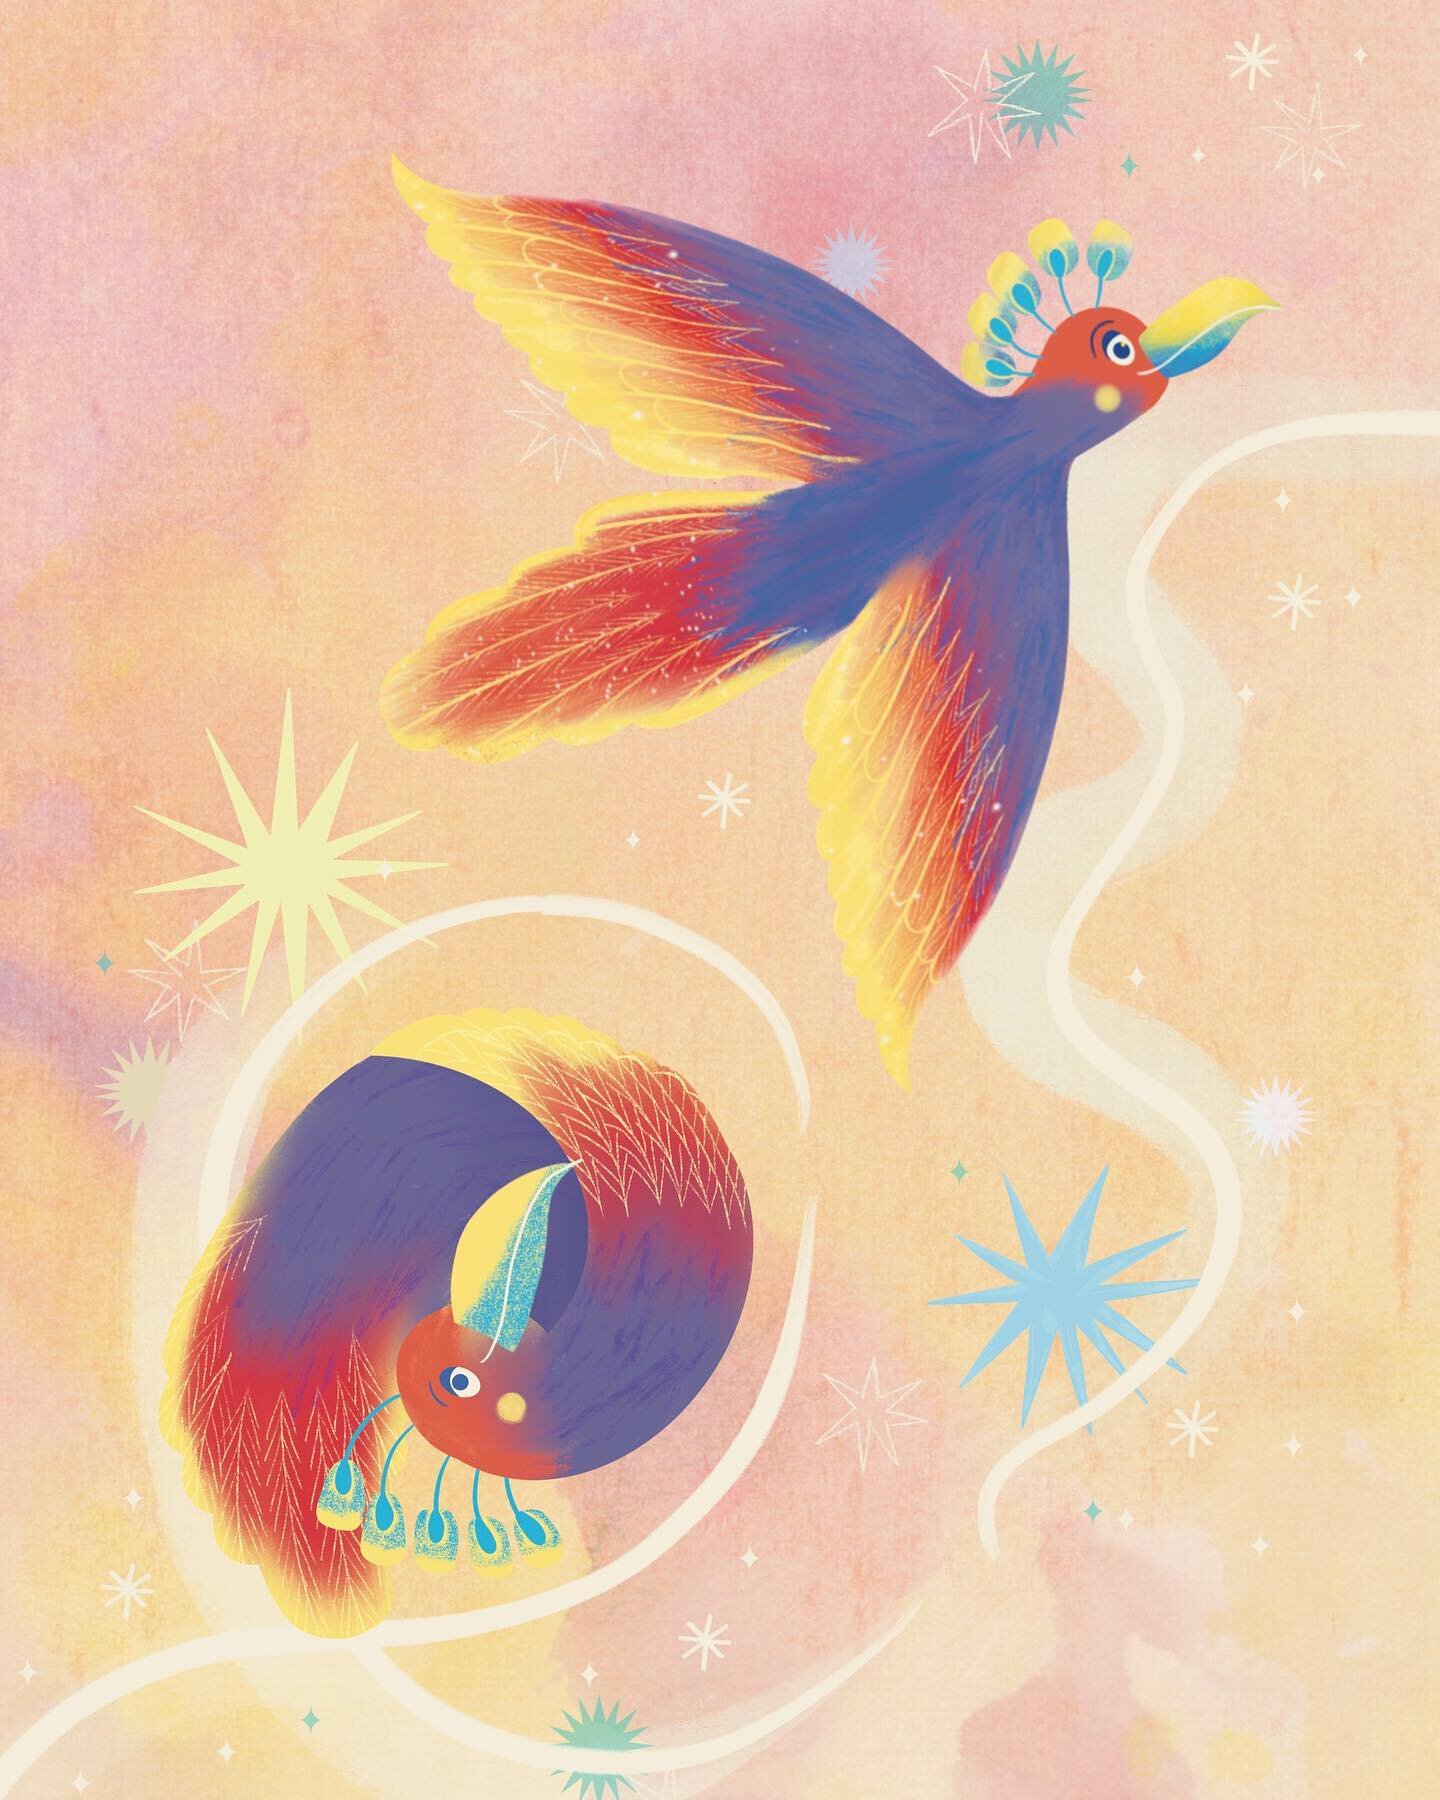 Last year around this time, I illustrated my first children&rsquo;s book!

It&rsquo;s a story about a colorful bird who gets to deal with lots of insecurities when growing up, which causes him to not see his own beauty and fears to fail to fly. 

Sel